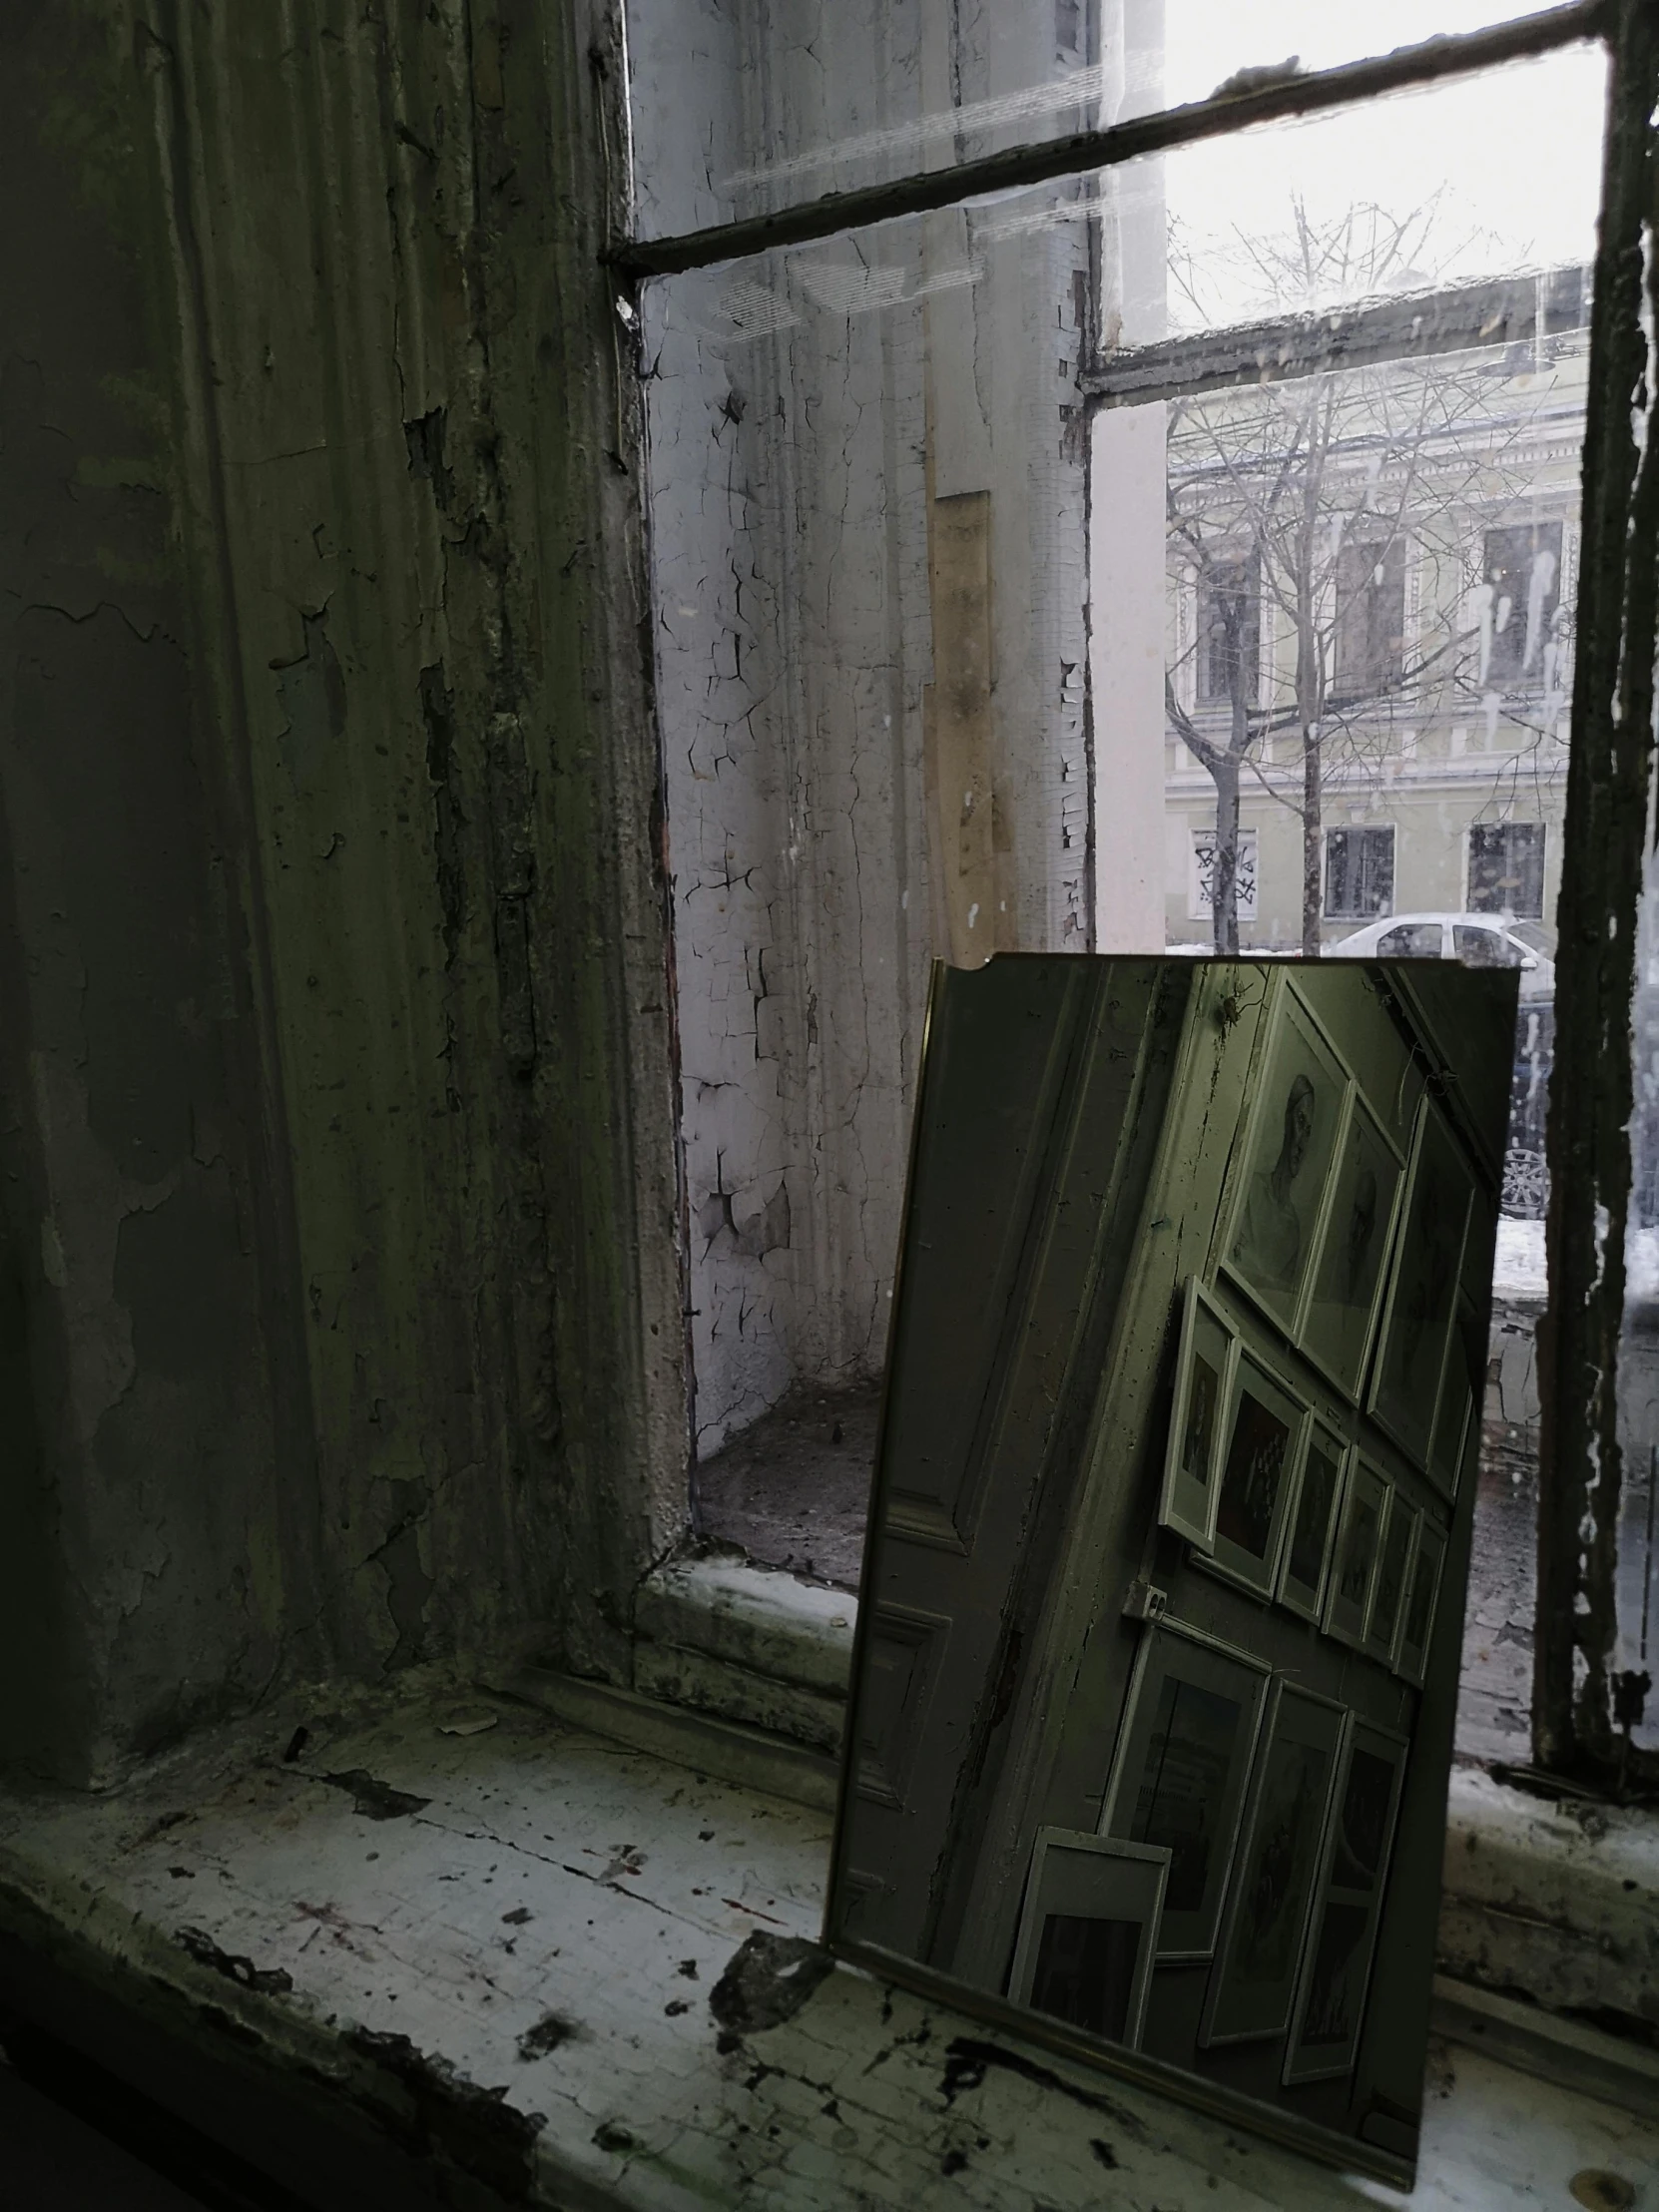 a mirror sitting on top of a window sill, an album cover, hyperrealism, in tarkov, low quality photo, derelict, snapchat photo